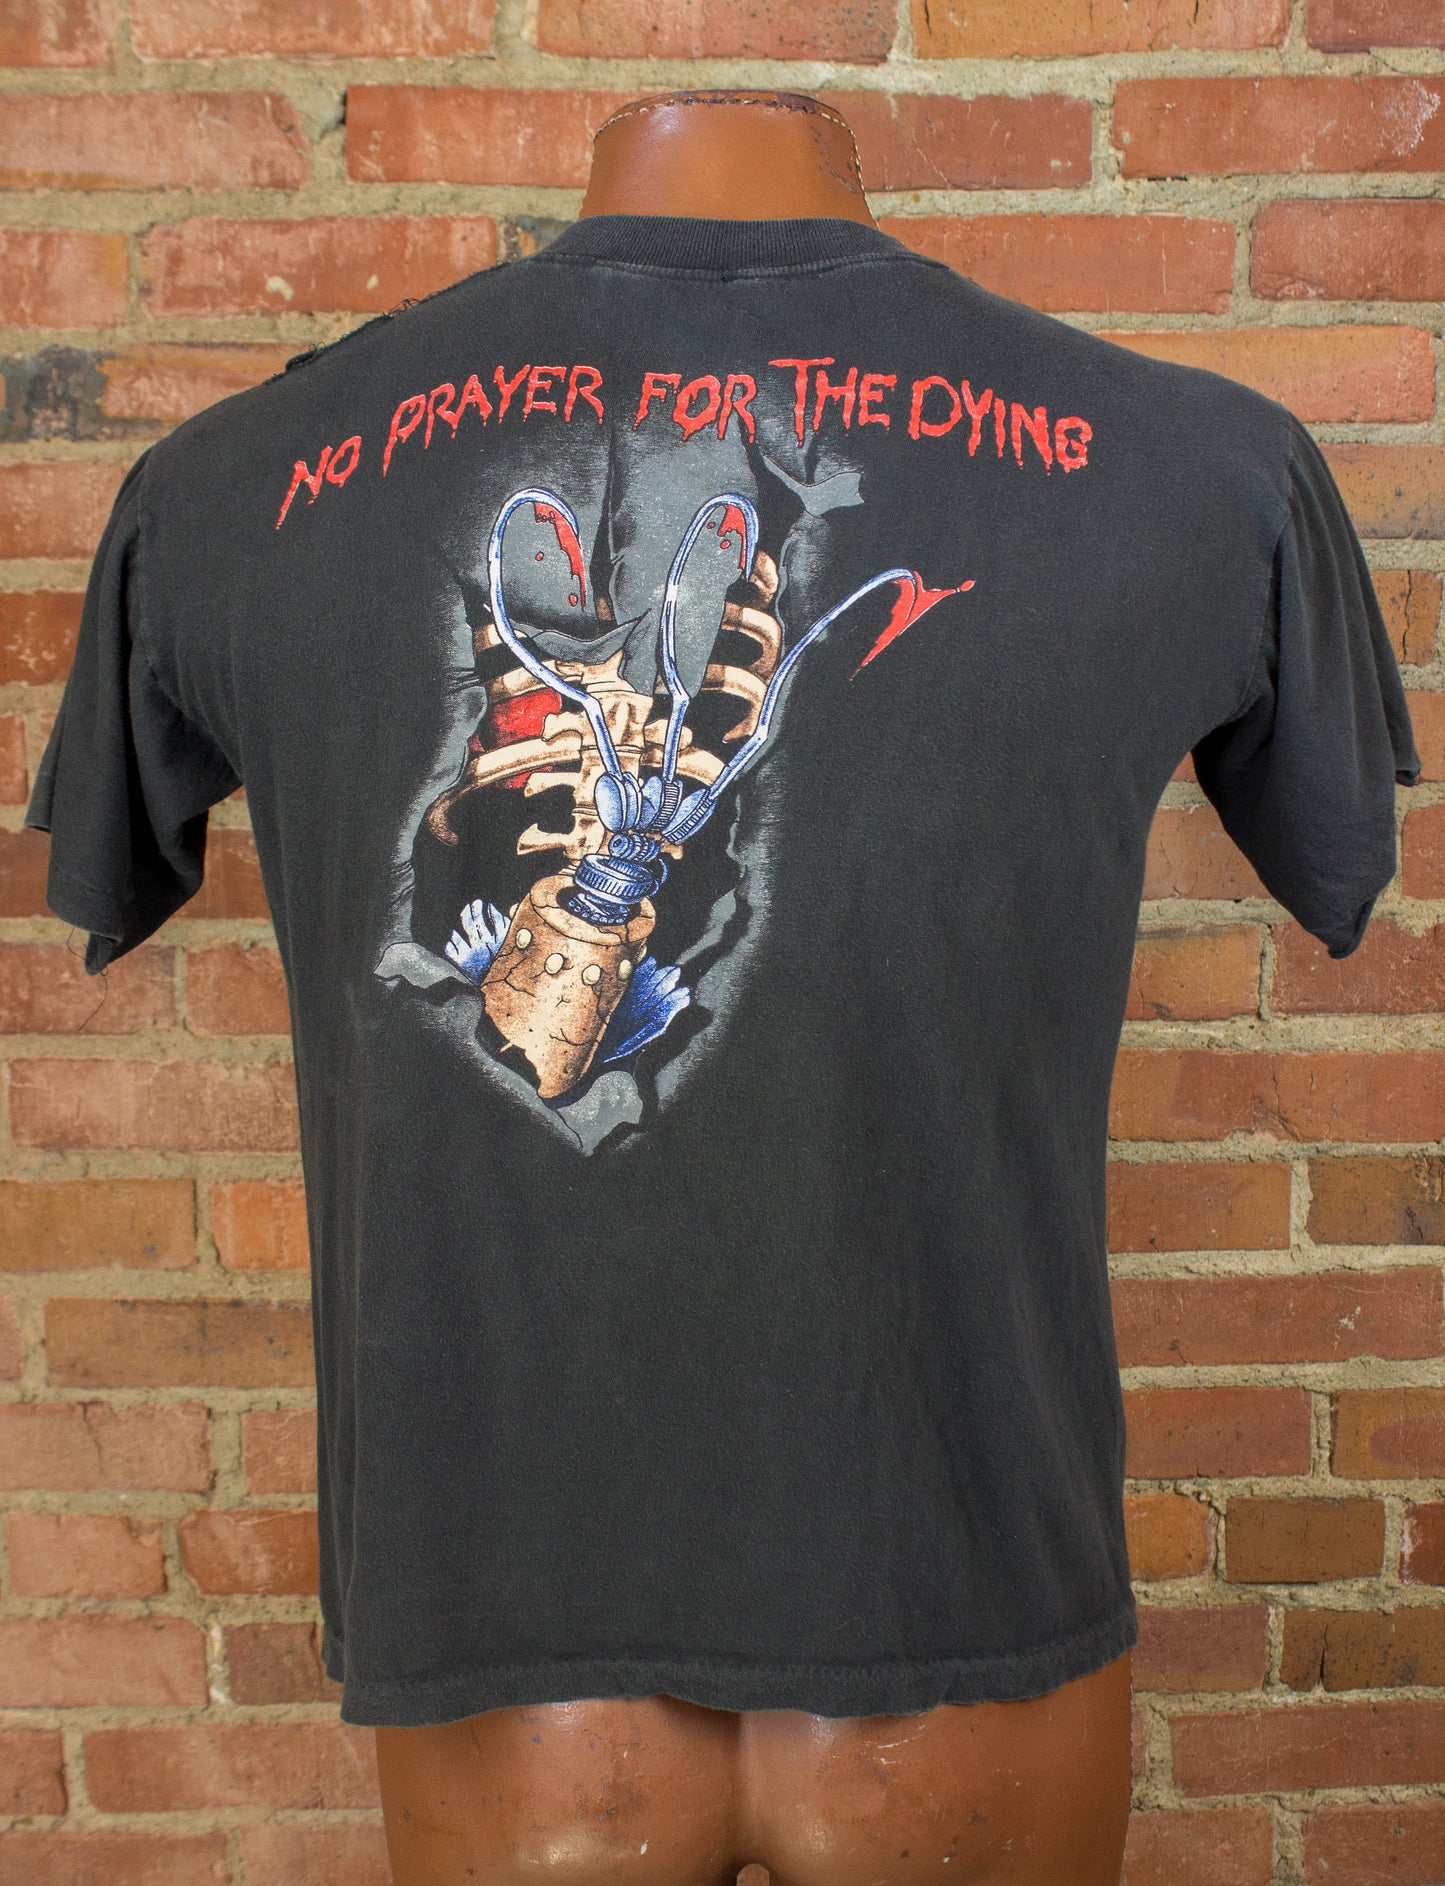 Vintage Iron Maiden Concert T Shirt 1990 No Prayer For The Dying Black Medium-Large